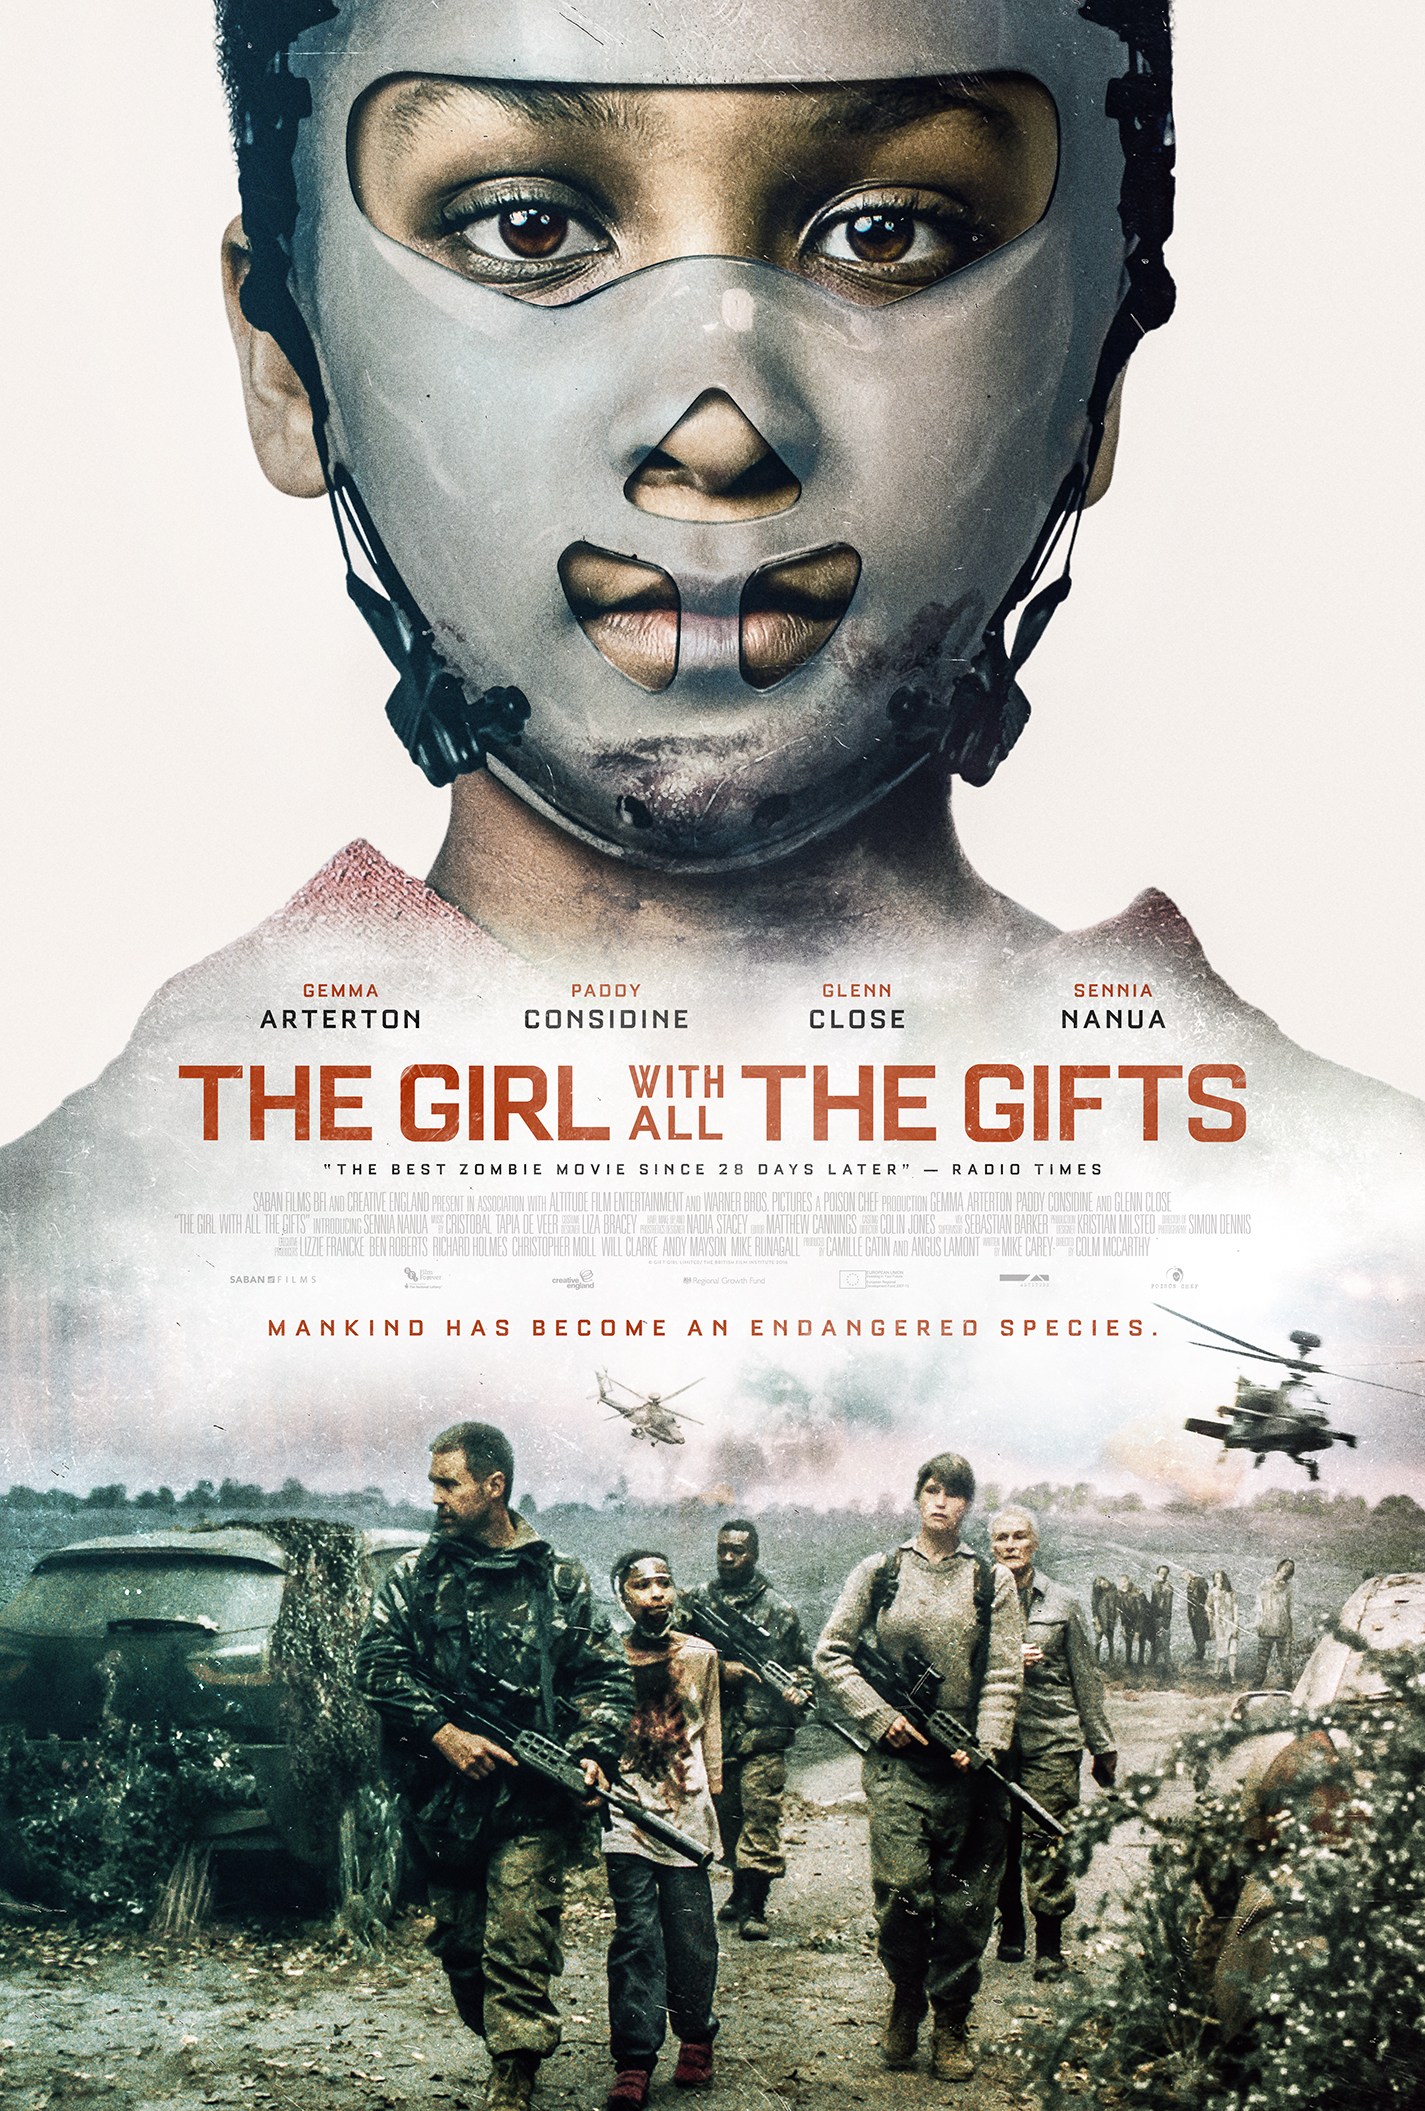 the-girl-with-all-the-gifts-poster.jpg